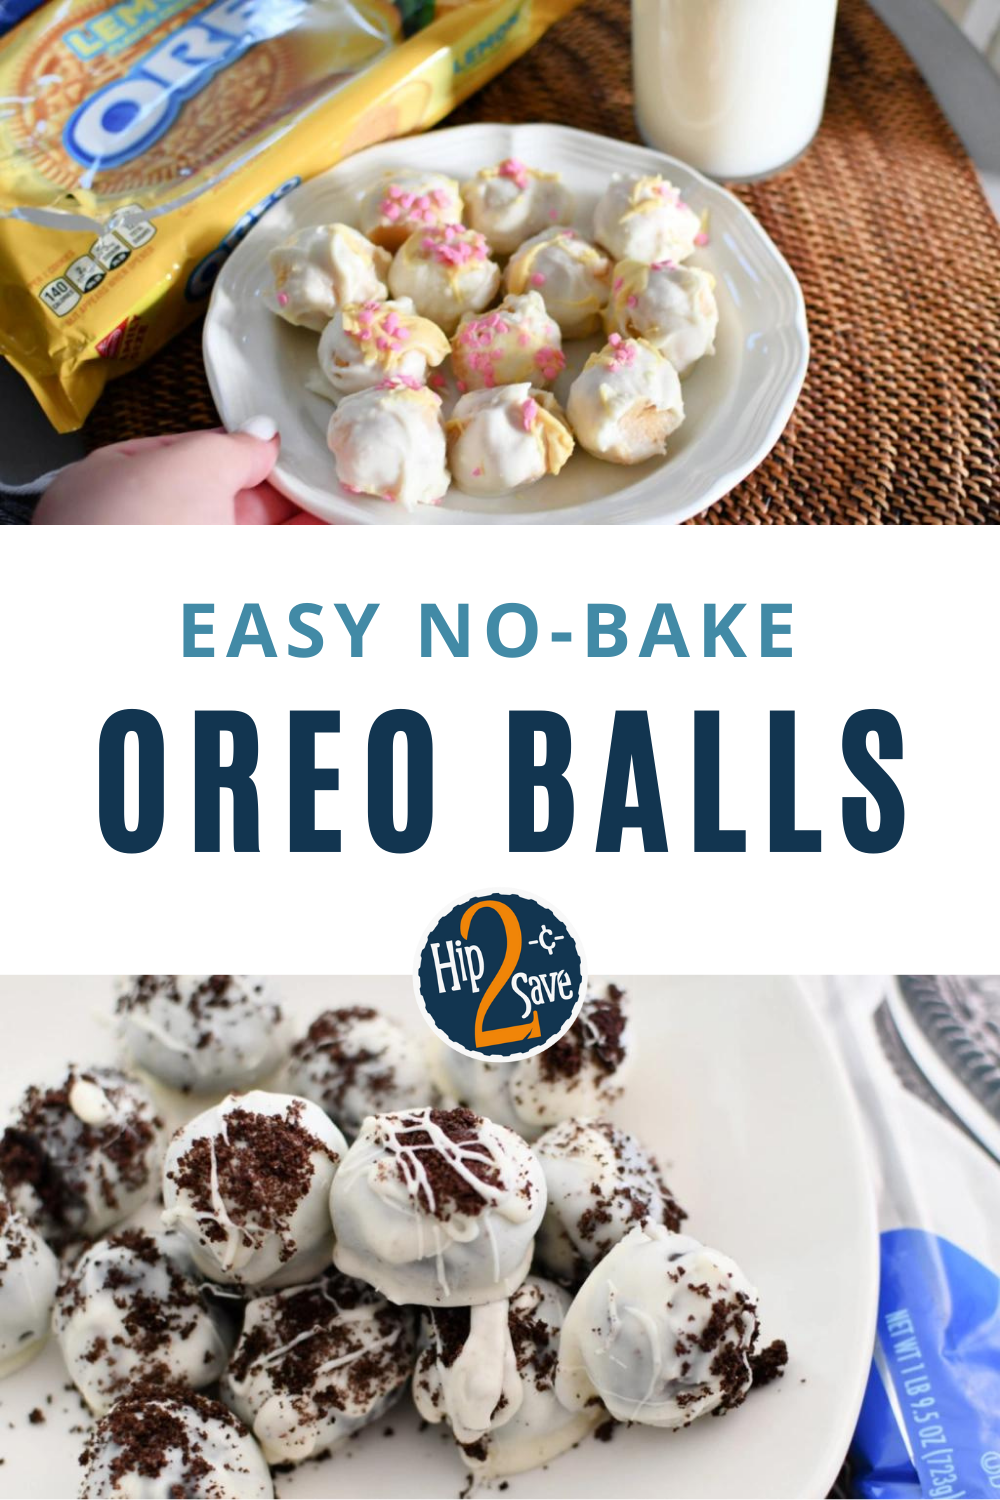 Easy No-Bake Oreo Balls Made With Just 3 Ingredients | Hip2Save